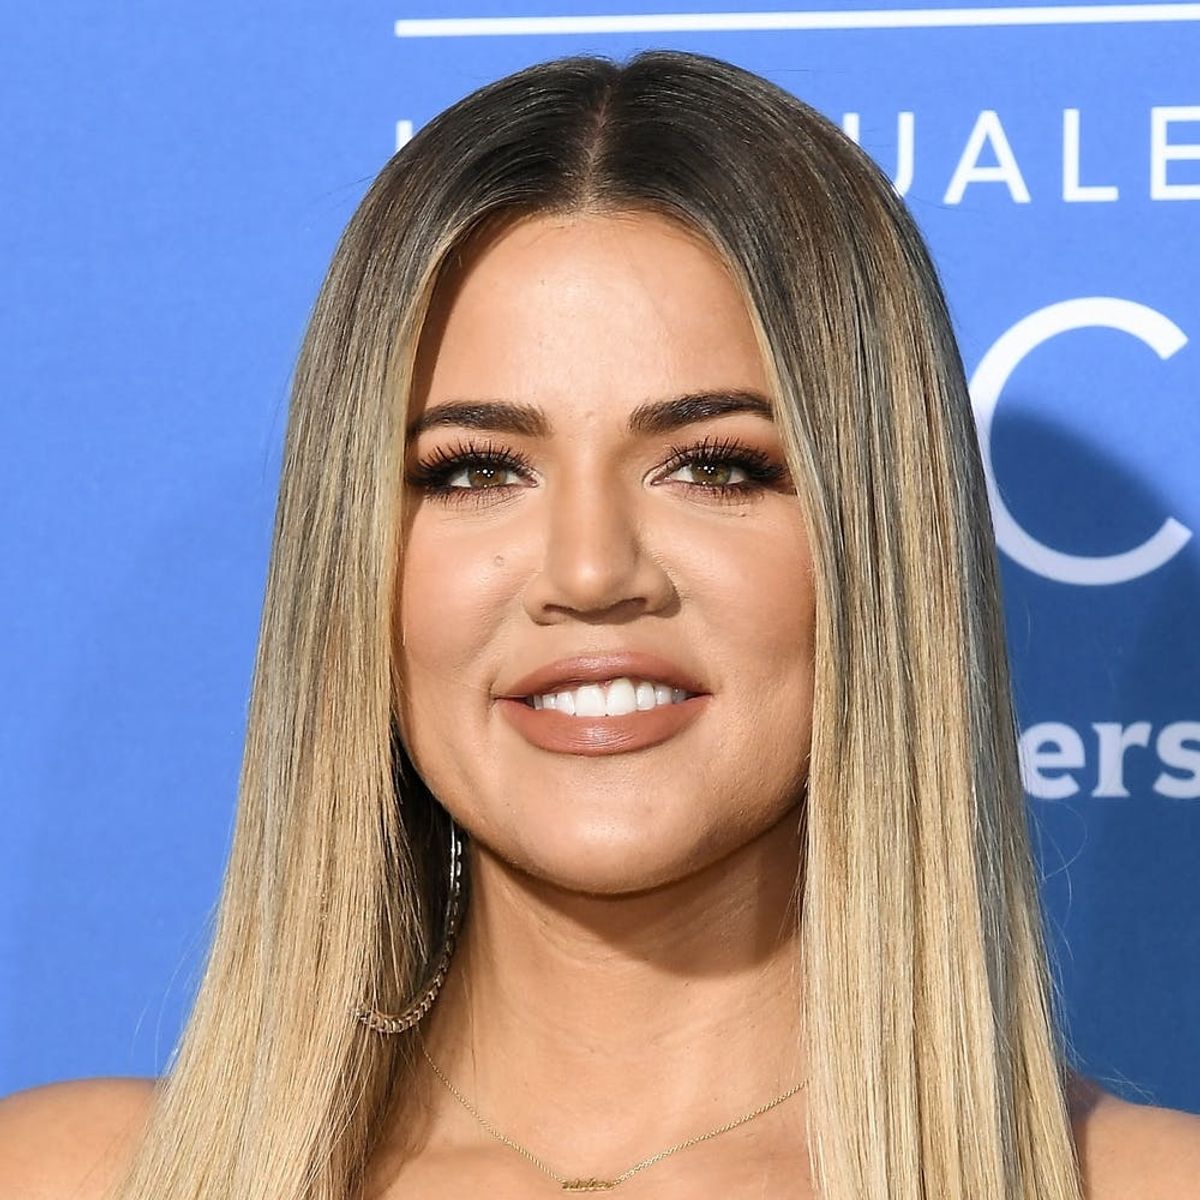 This Is What Khloé Kardashian Looks Like Without a Full Face of Makeup